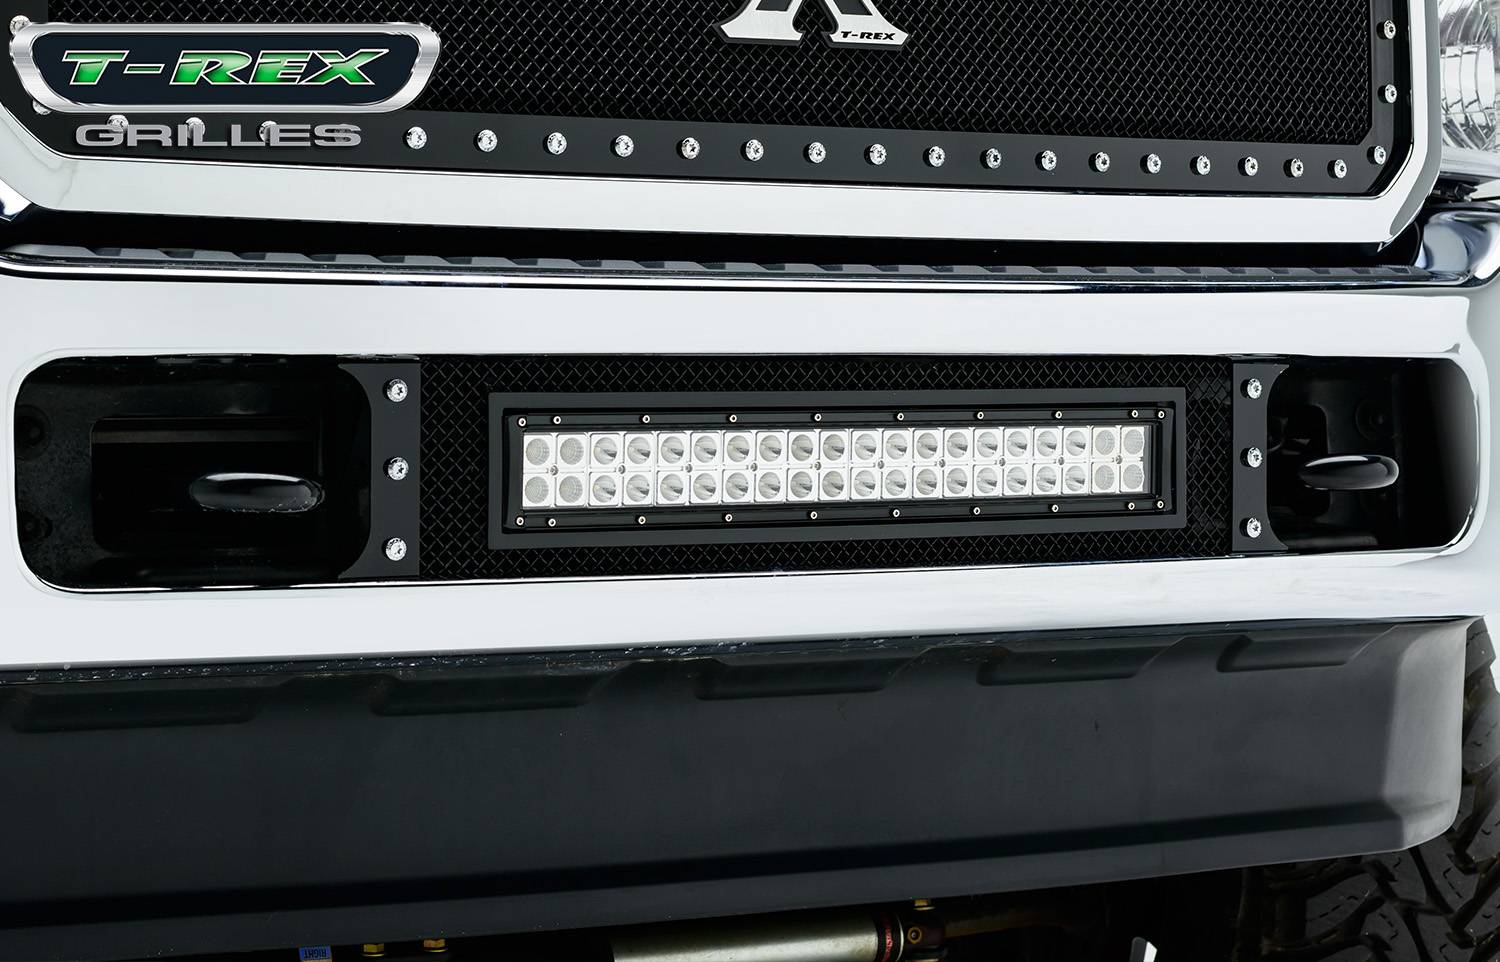 T-REX GRILLES - 2011-2016 Ford Super Duty Torch Bumper Grille, Black, 1 Pc, Bolt-On, Chrome Studs with (1) 20" LED - Part # 6325461